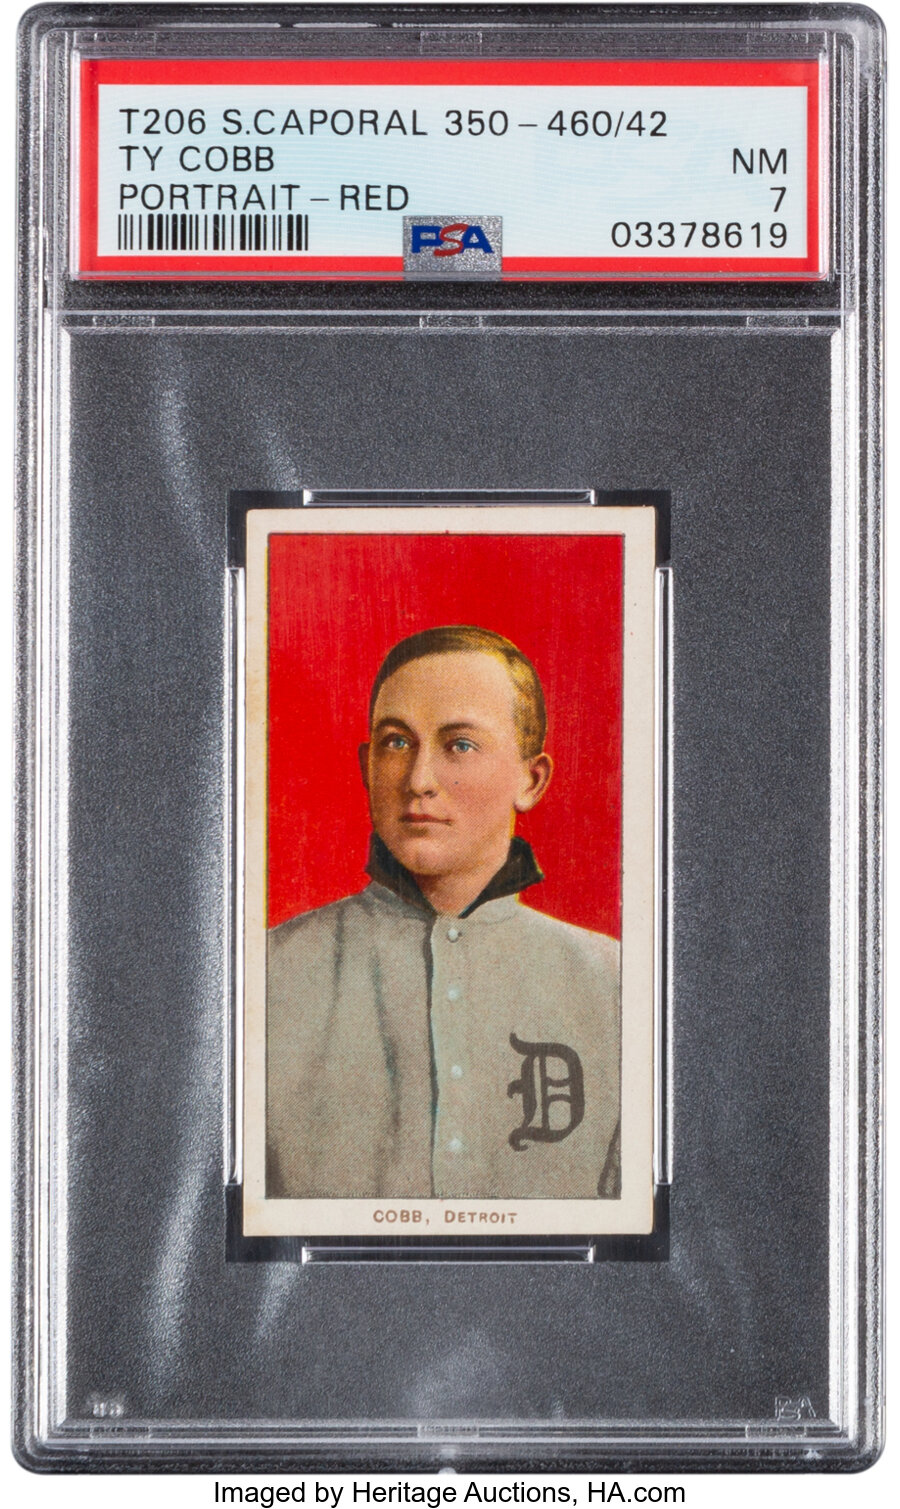 1909-11 T206 Sweet Caporal 350-460/42 Ty Cobb (Portrait-Red) PSA NM 7 - Pop One, None Higher